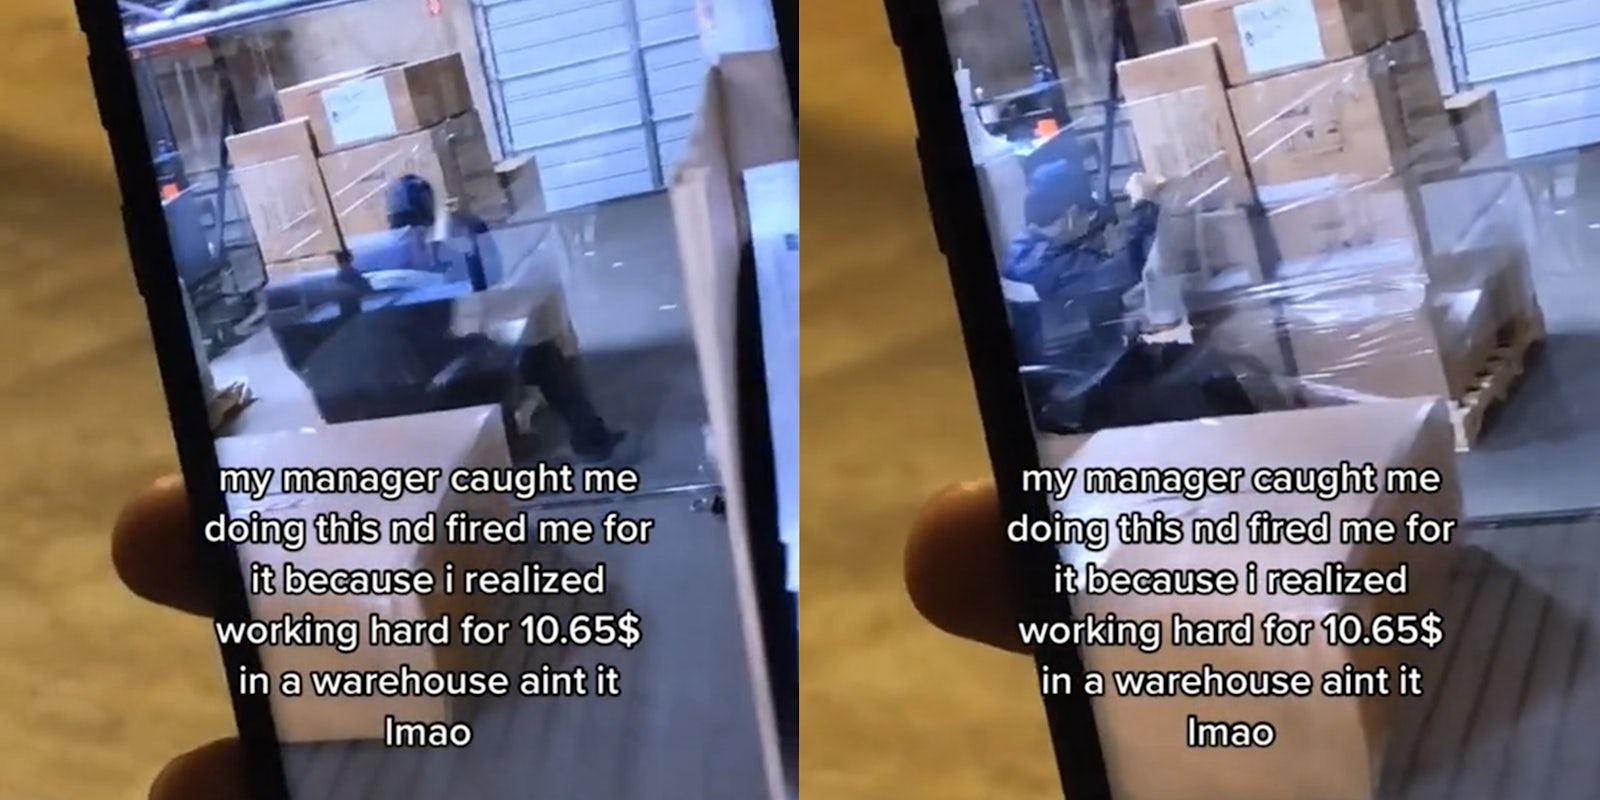 hand holding phone showing video of man wrapping boxes while sitting in rolling chair, caption 'my manager caught me doing this nd fired me for it because i realized working hard for 10.65$ in a warehouse aint it lmao'